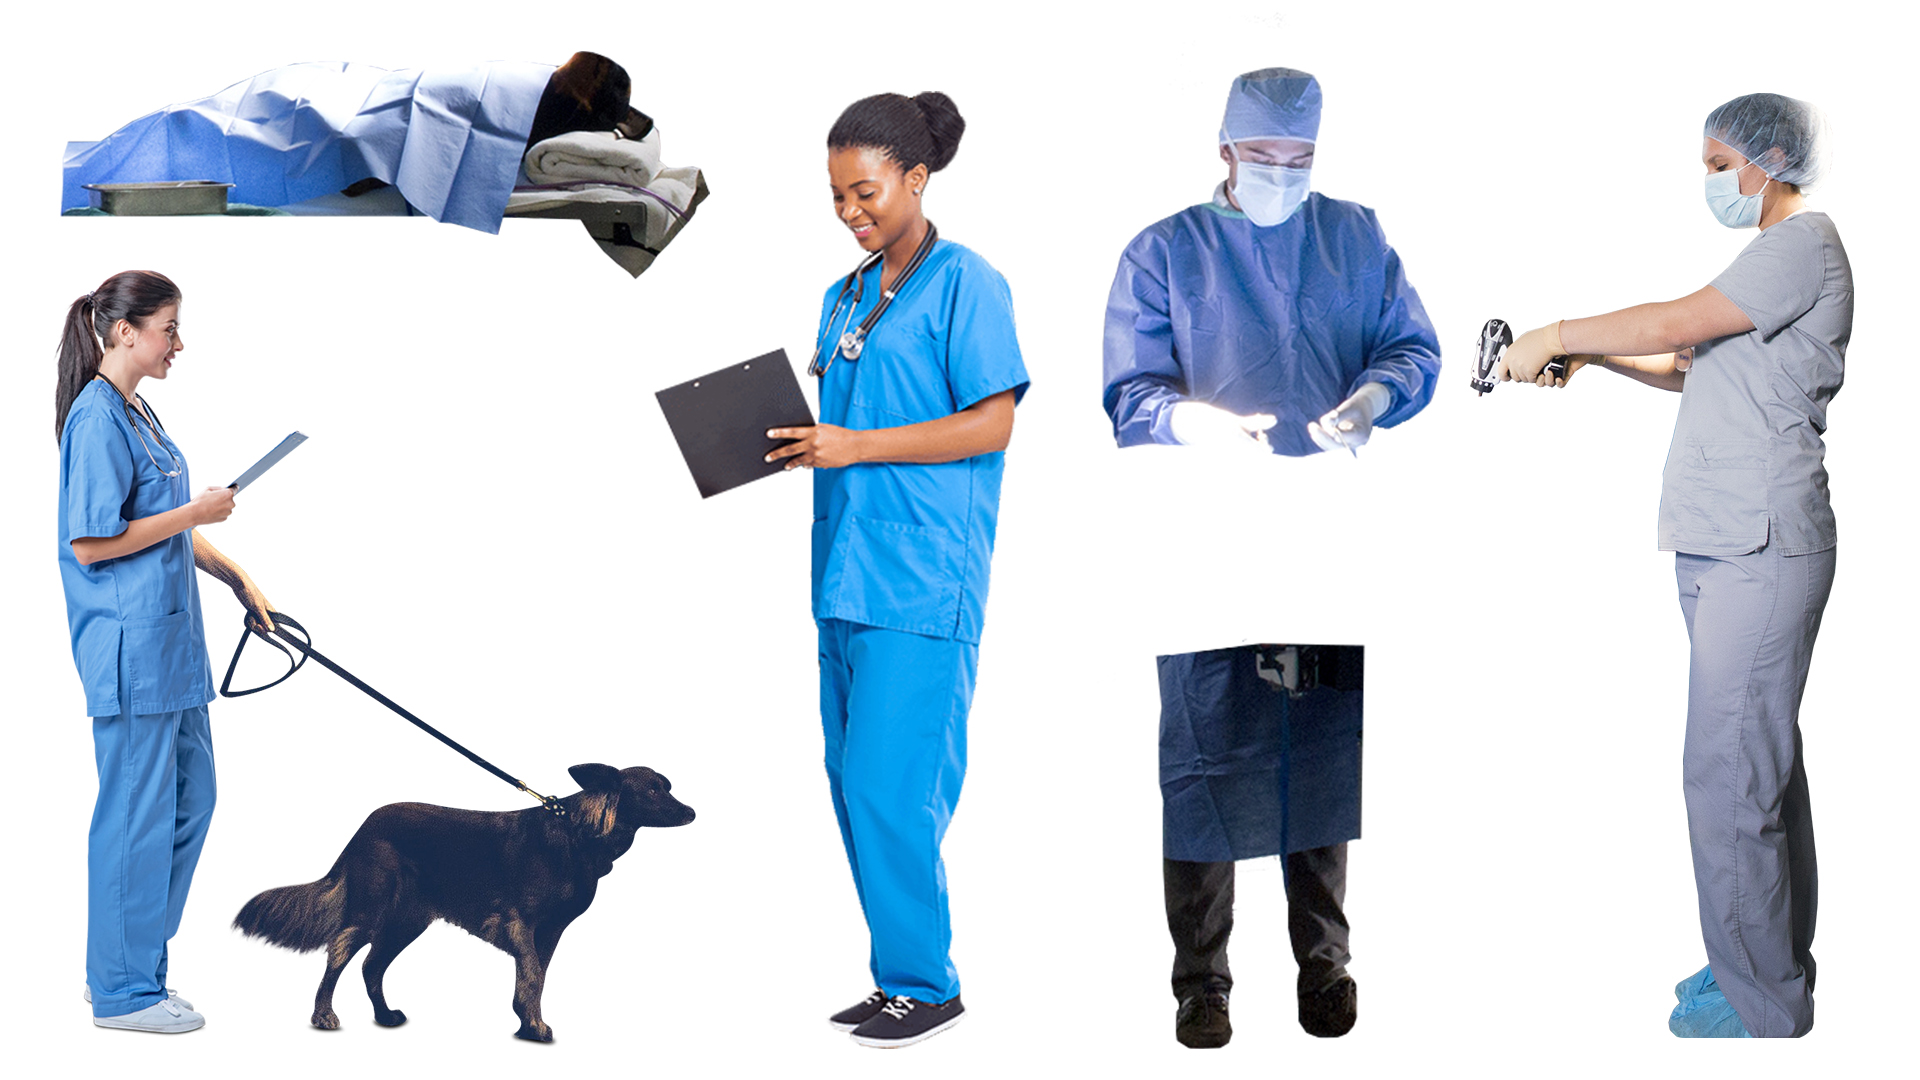 Photo References of Veterinary Clinic Staff and Animals